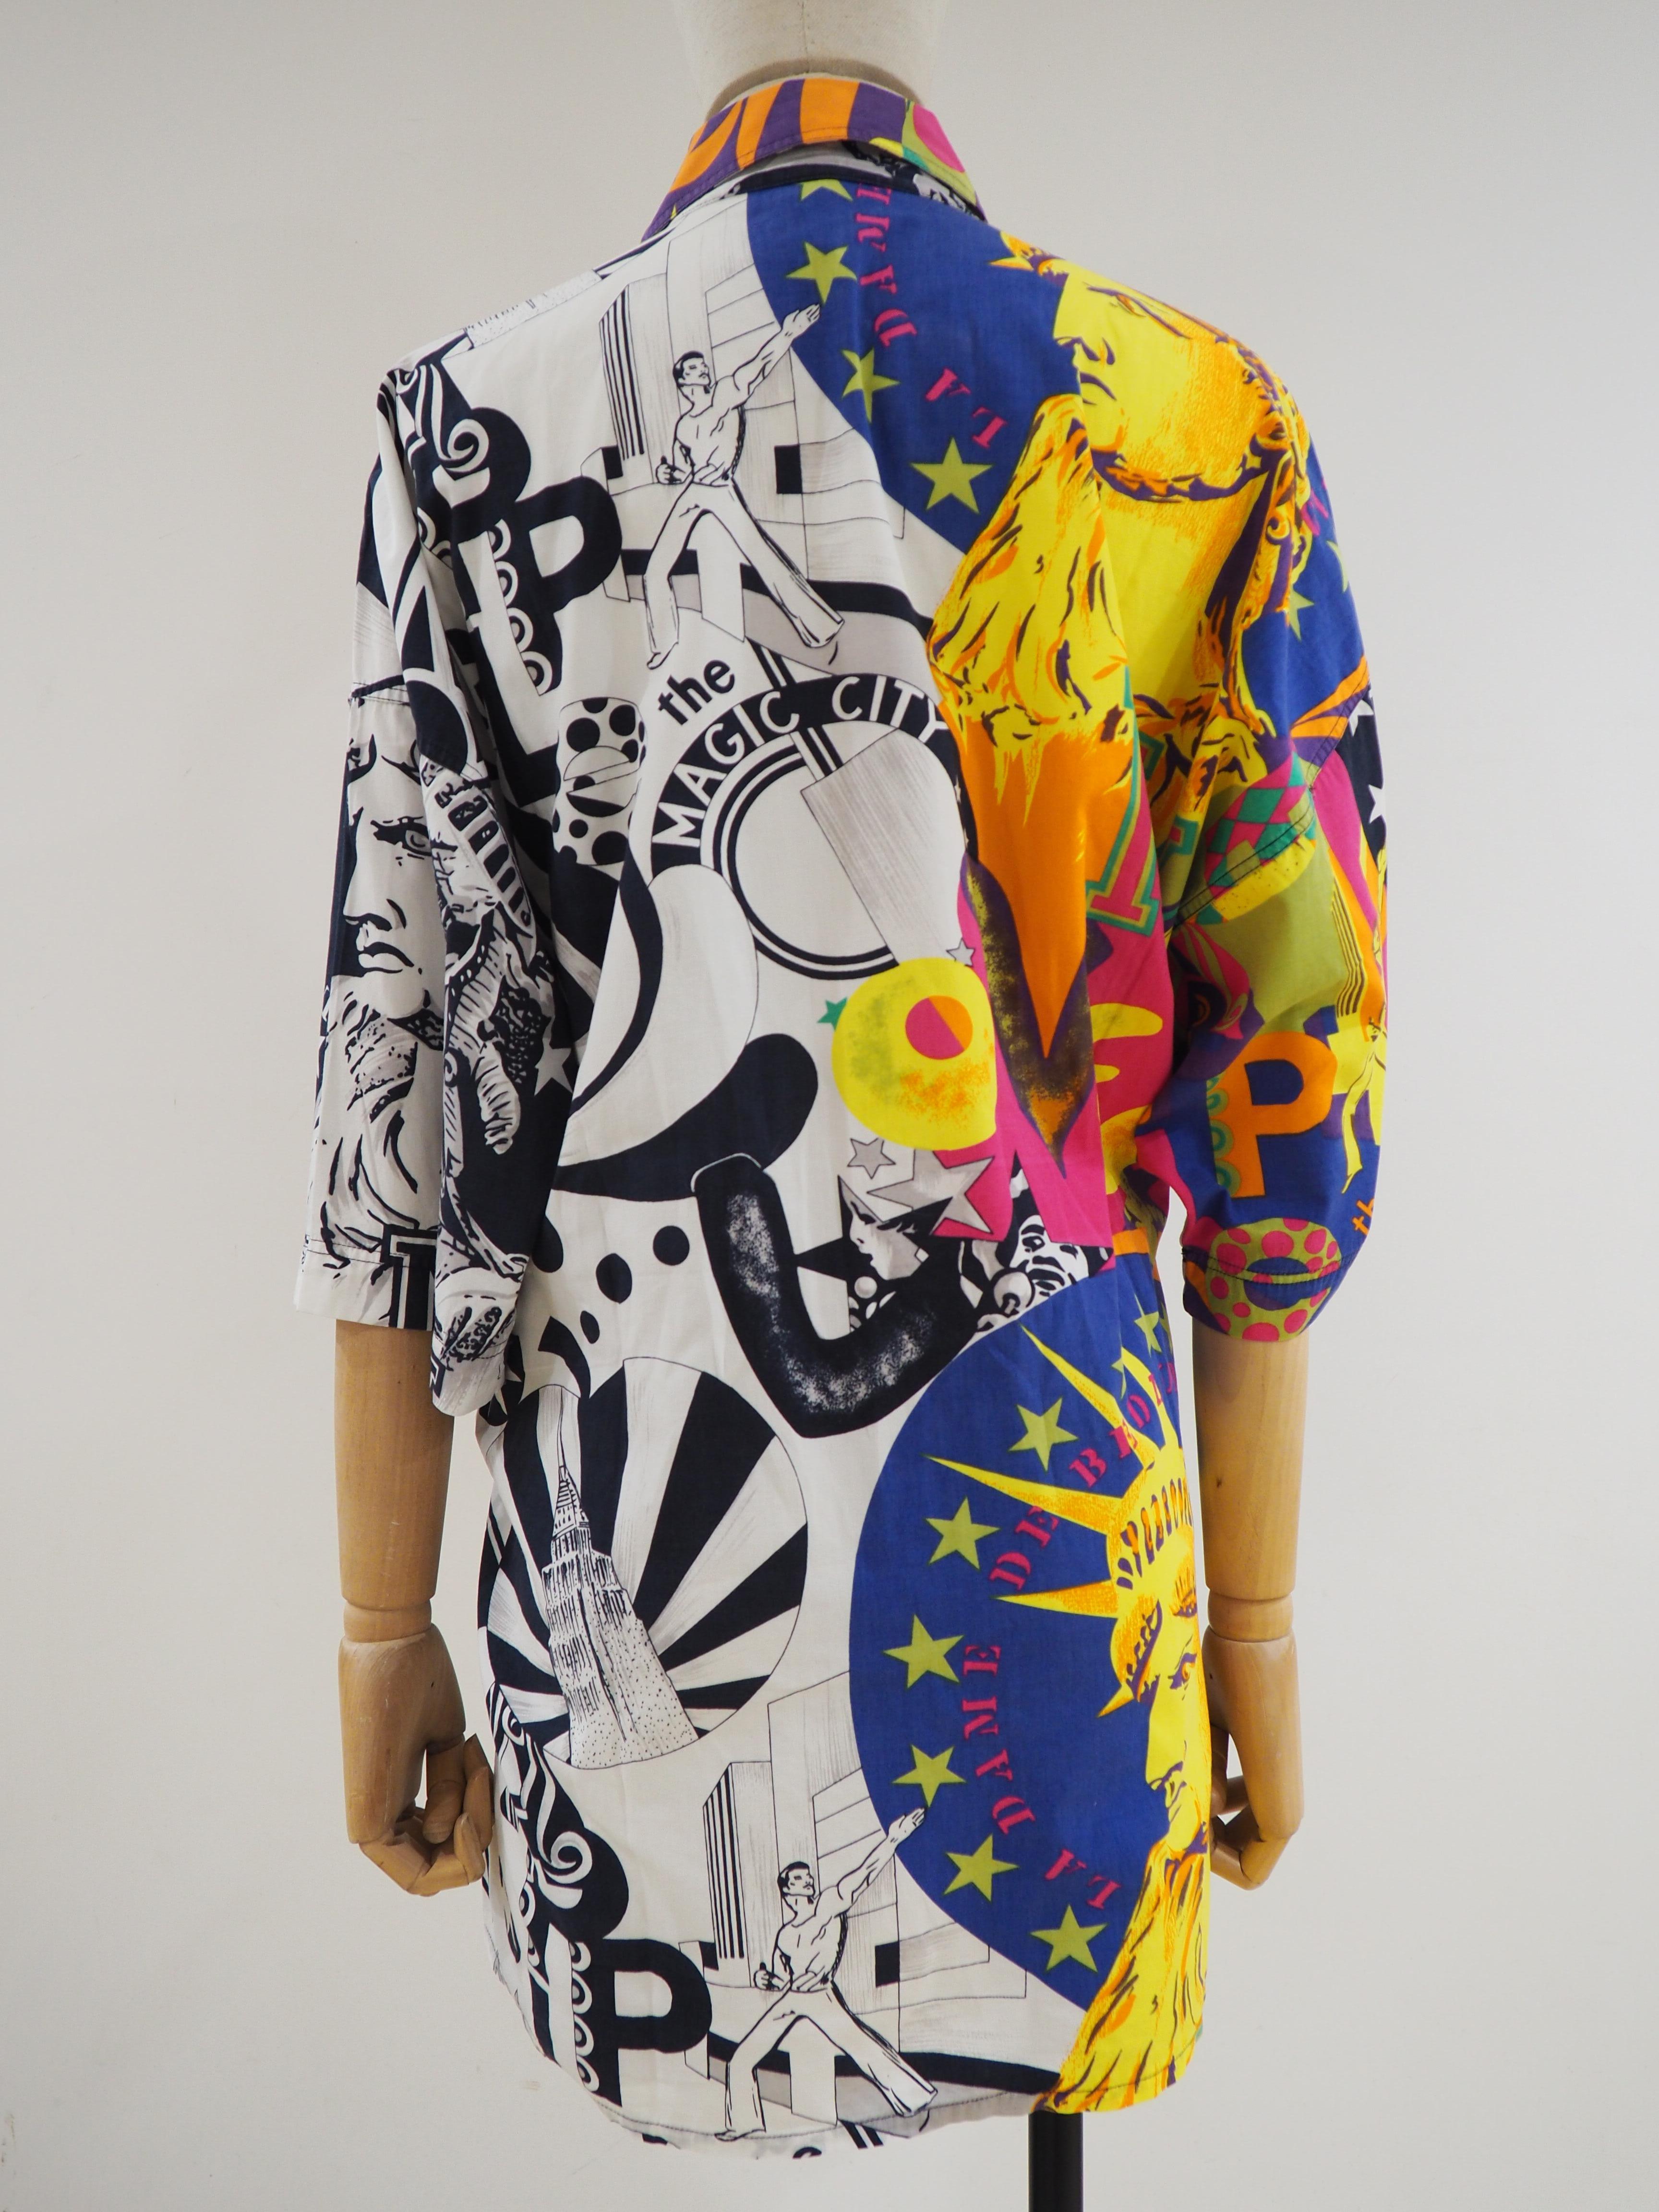 Versace Jeans Couture New York Pop Art multicoloured short sleeves cotton shirt
Size: L
totally made in Italy